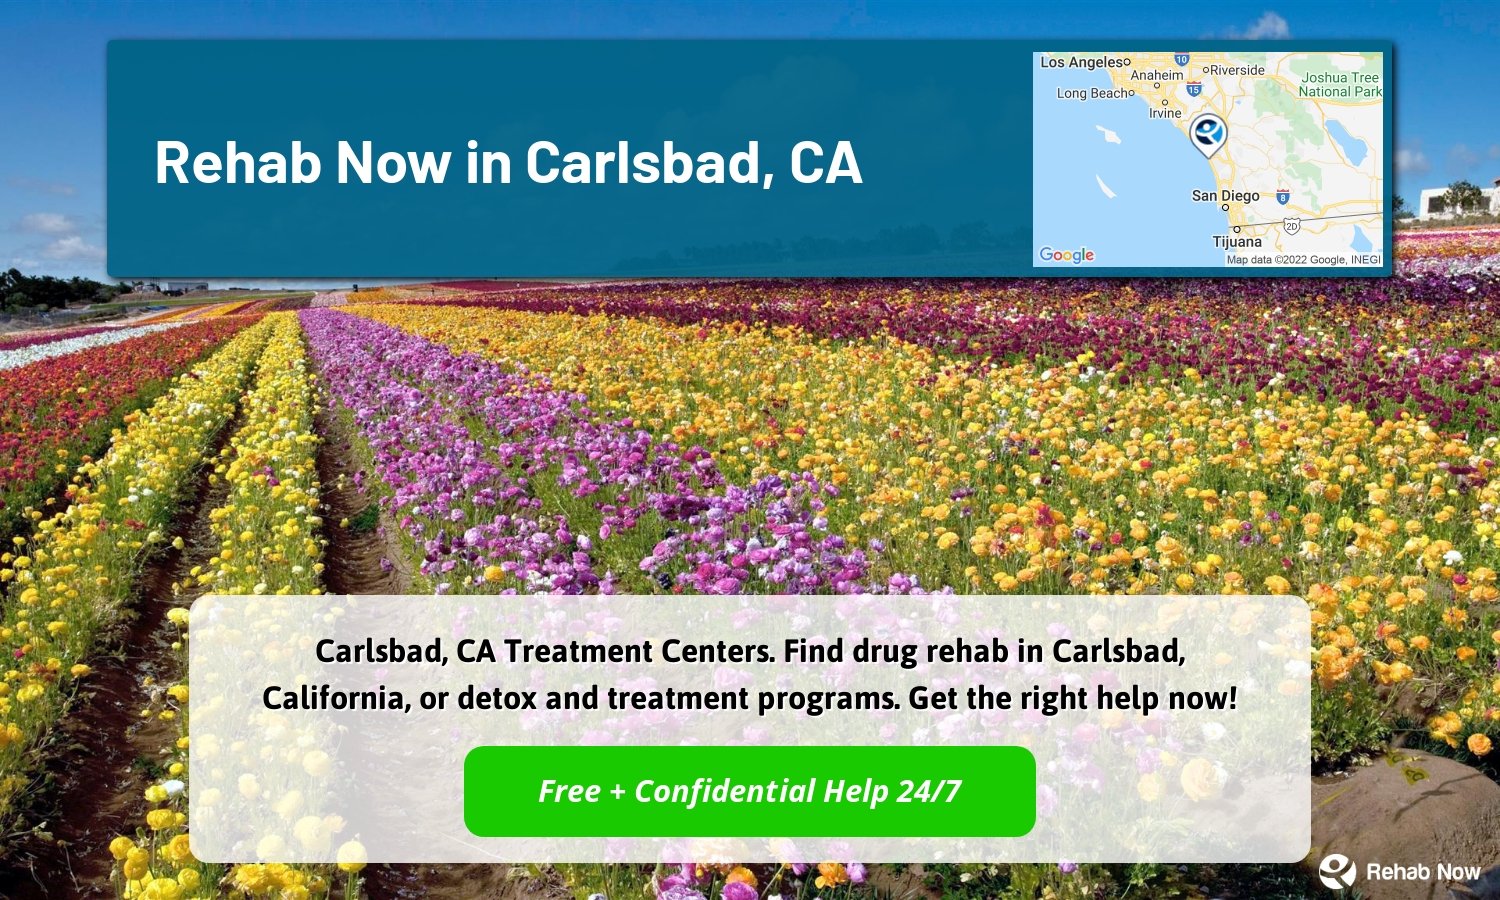 Carlsbad, CA Treatment Centers. Find drug rehab in Carlsbad, California, or detox and treatment programs. Get the right help now!